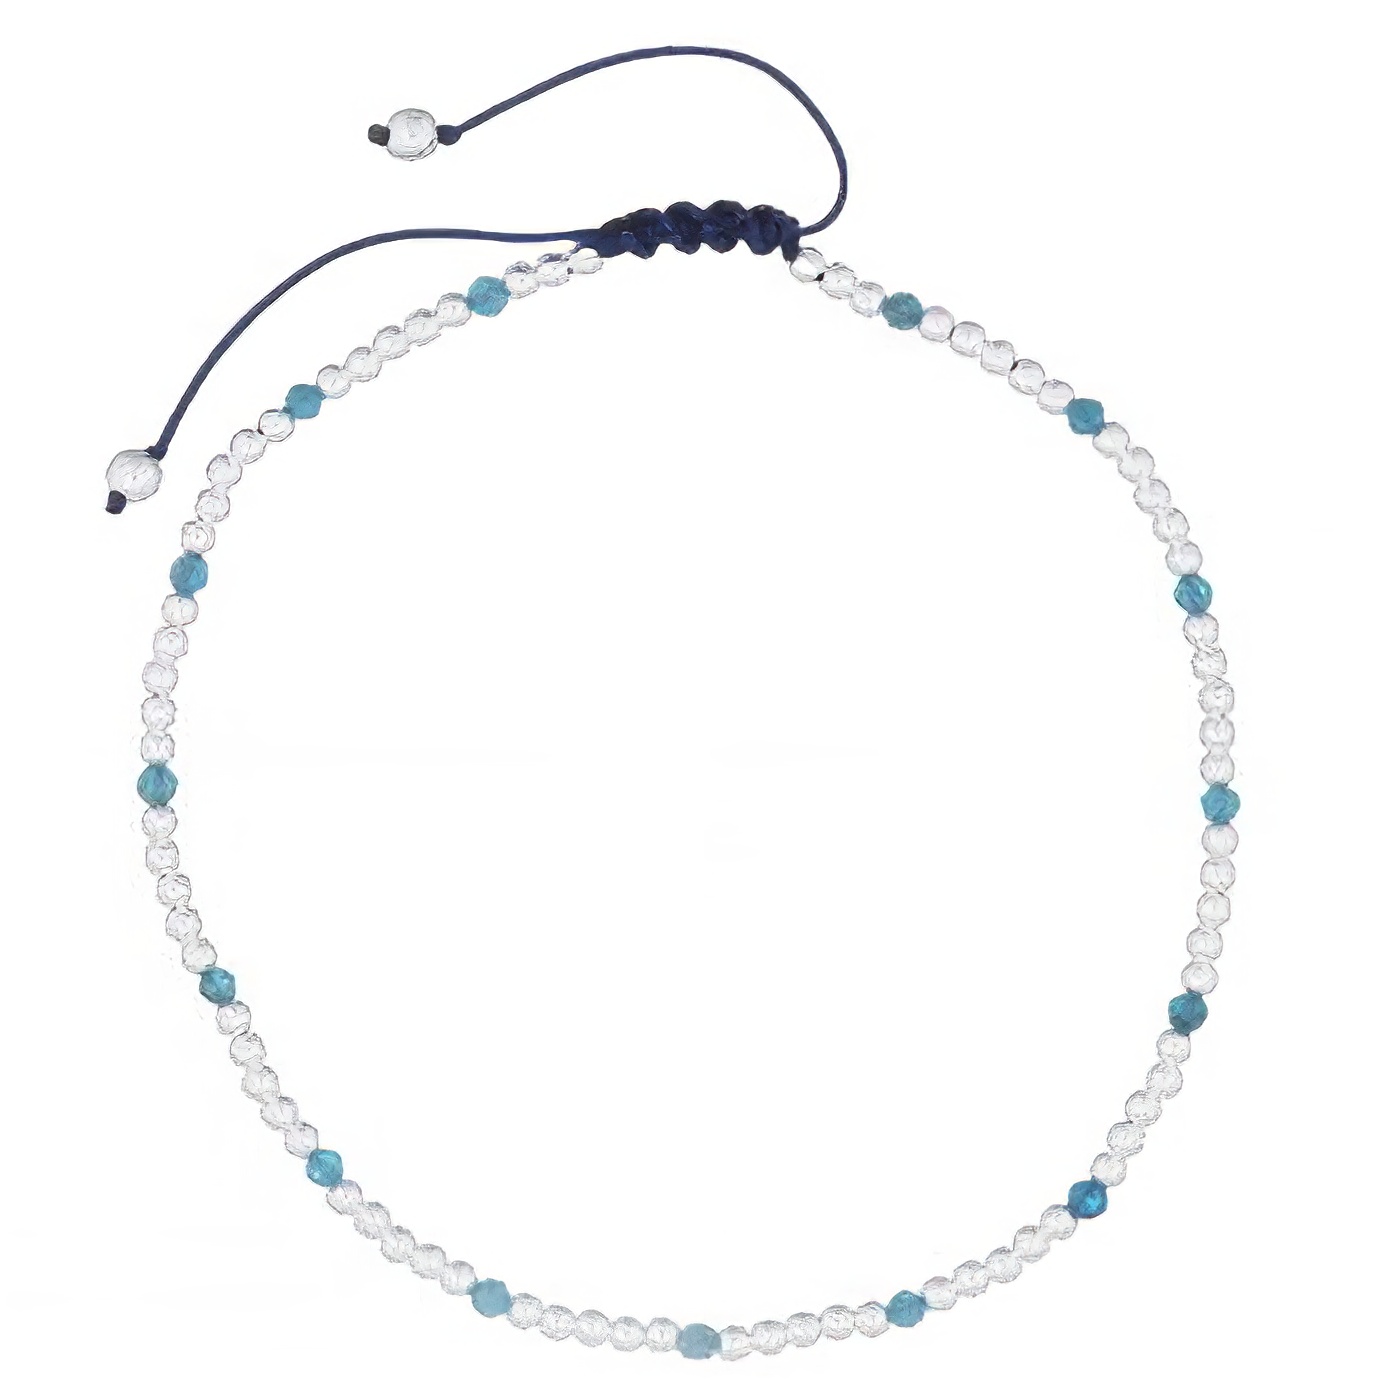 Polyester Bracelet With 925 Silver Beads And Apatite Stones by BeYindi 